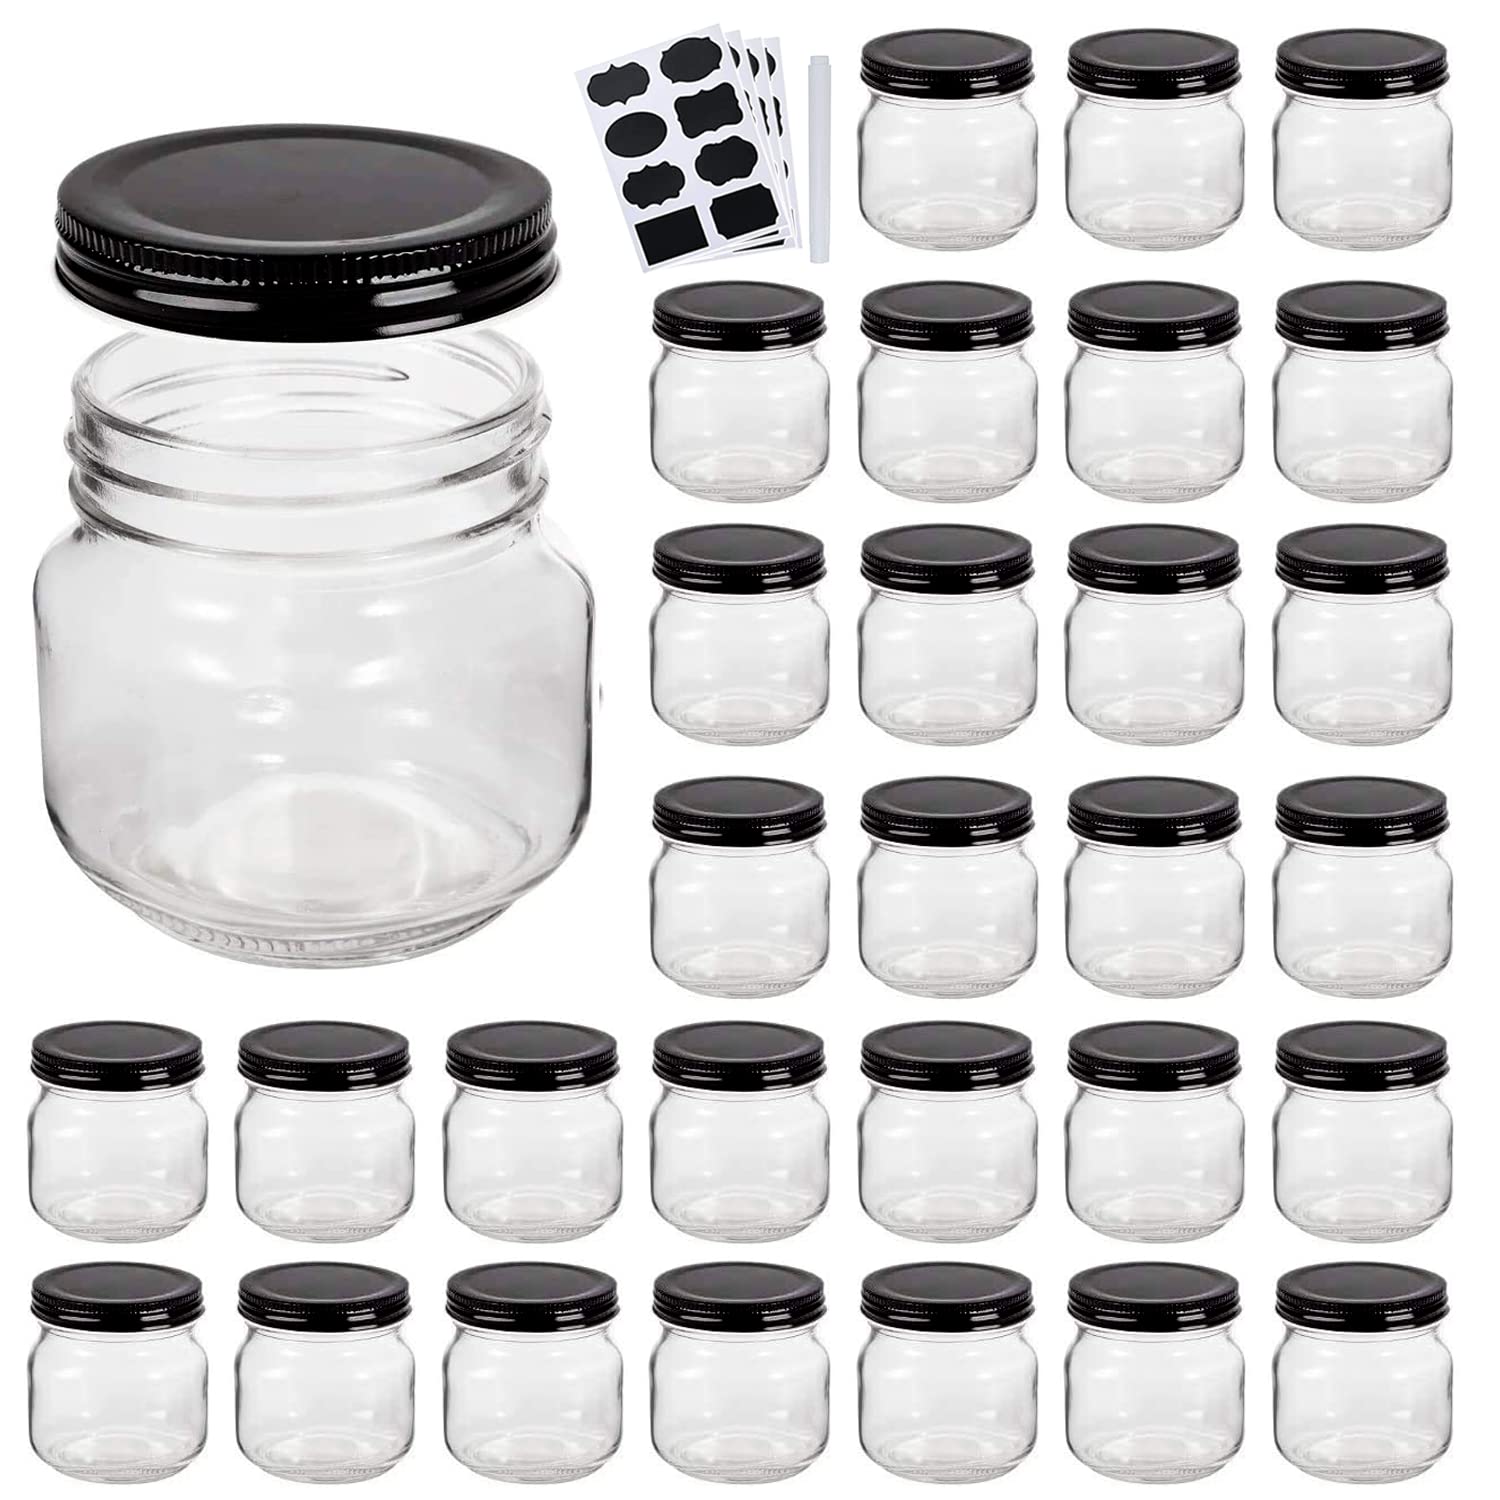 Mason Jars,QAPPDA Glass Jars With Lids 8 oz,Canning Jars For Pickles And Kitchen Storage,Wide Mouth Spice Jars With Black Lids For Honey,Caviar,Her...